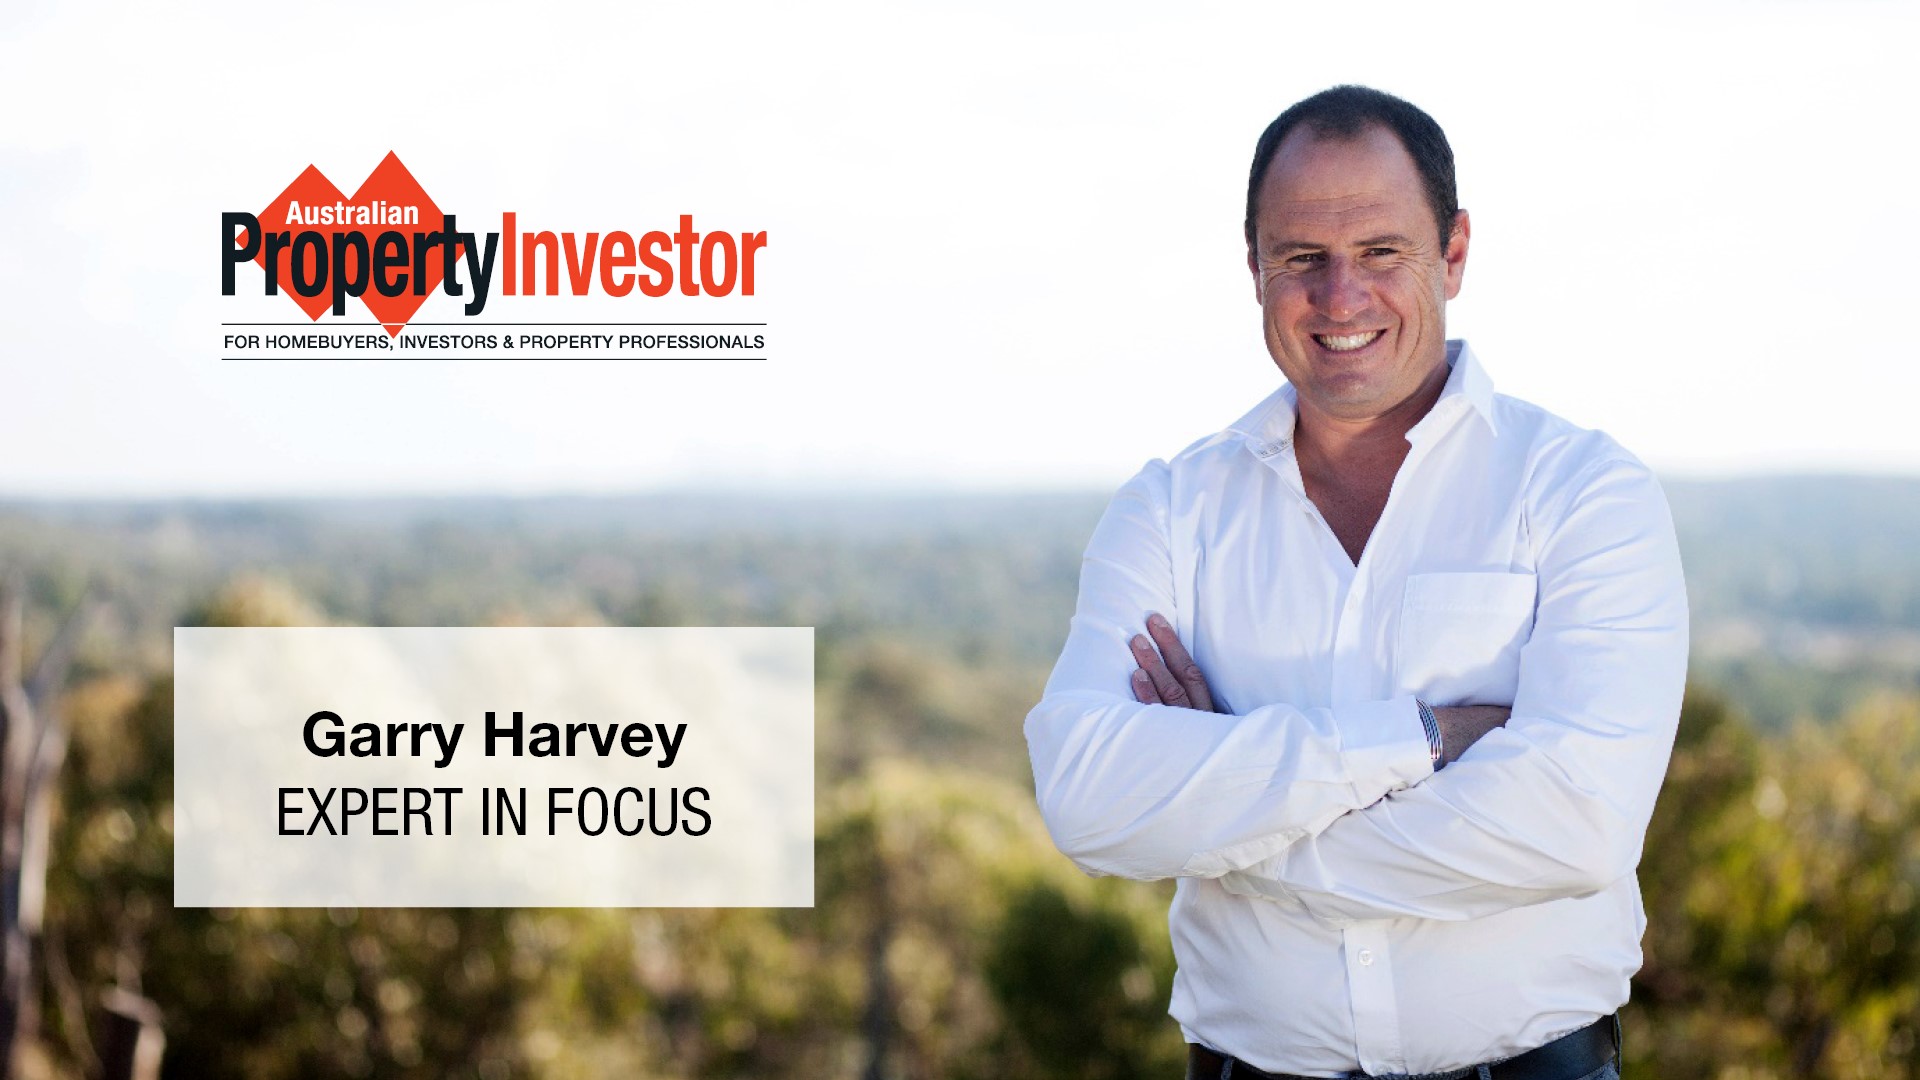 Garry Harvey - 33 Properties Across All States In 19 Years